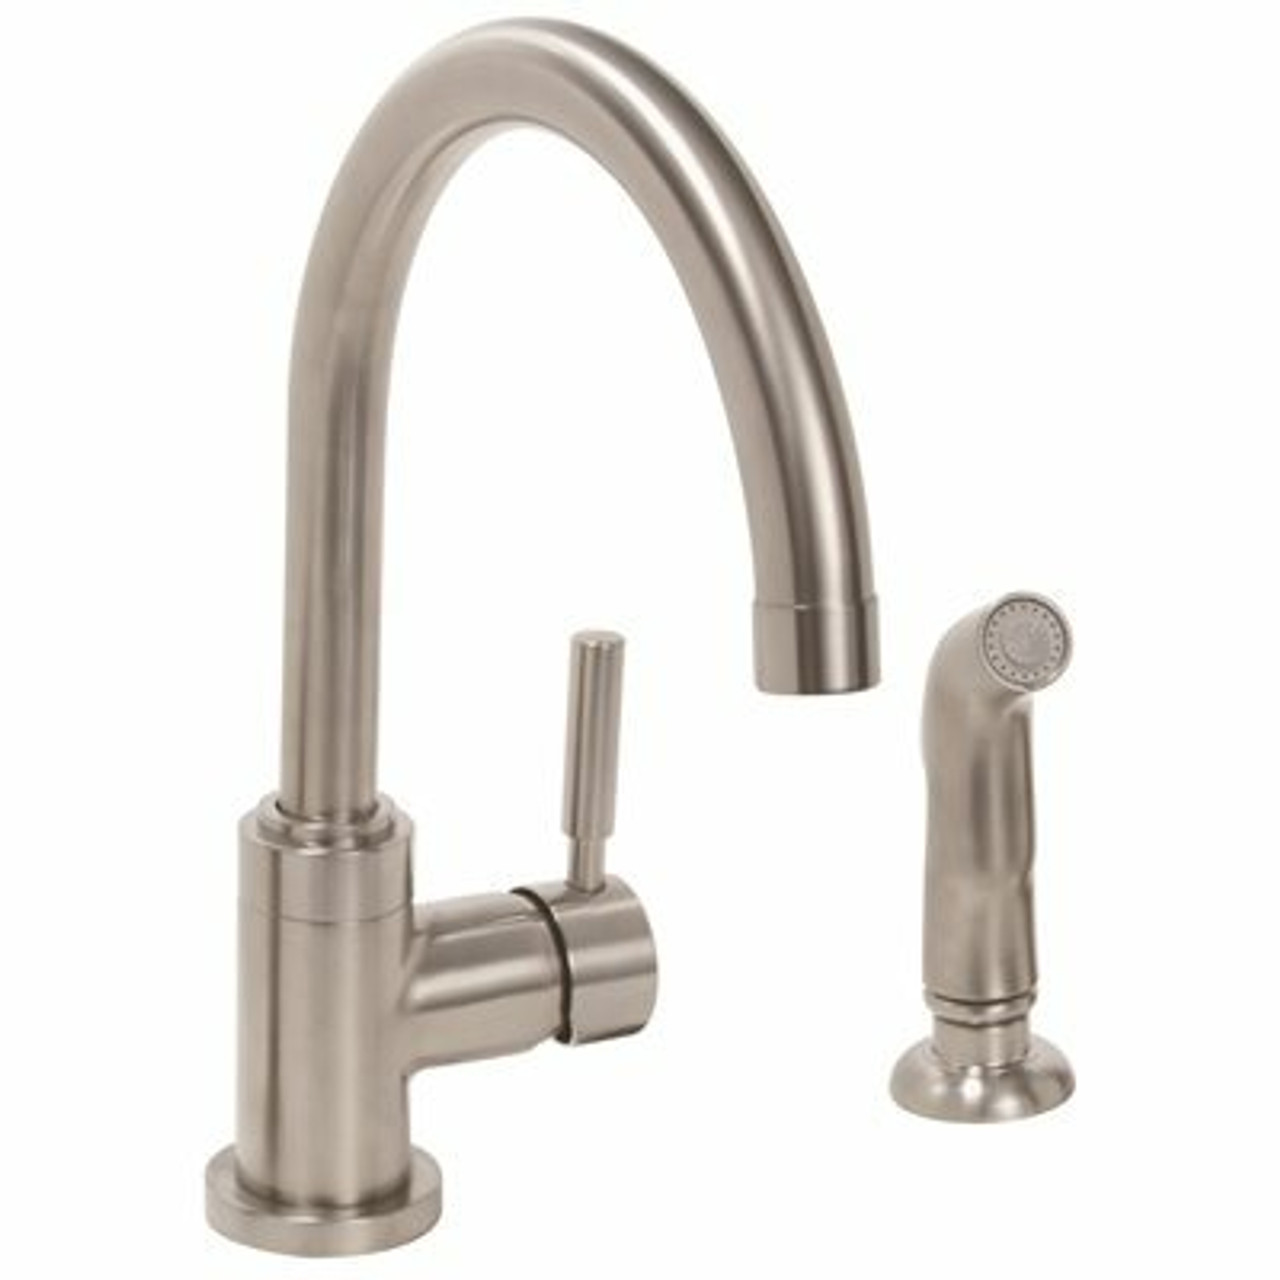 Premier Essen Single-Handle Kitchen Faucet With Side Spray In Brushed Nickel